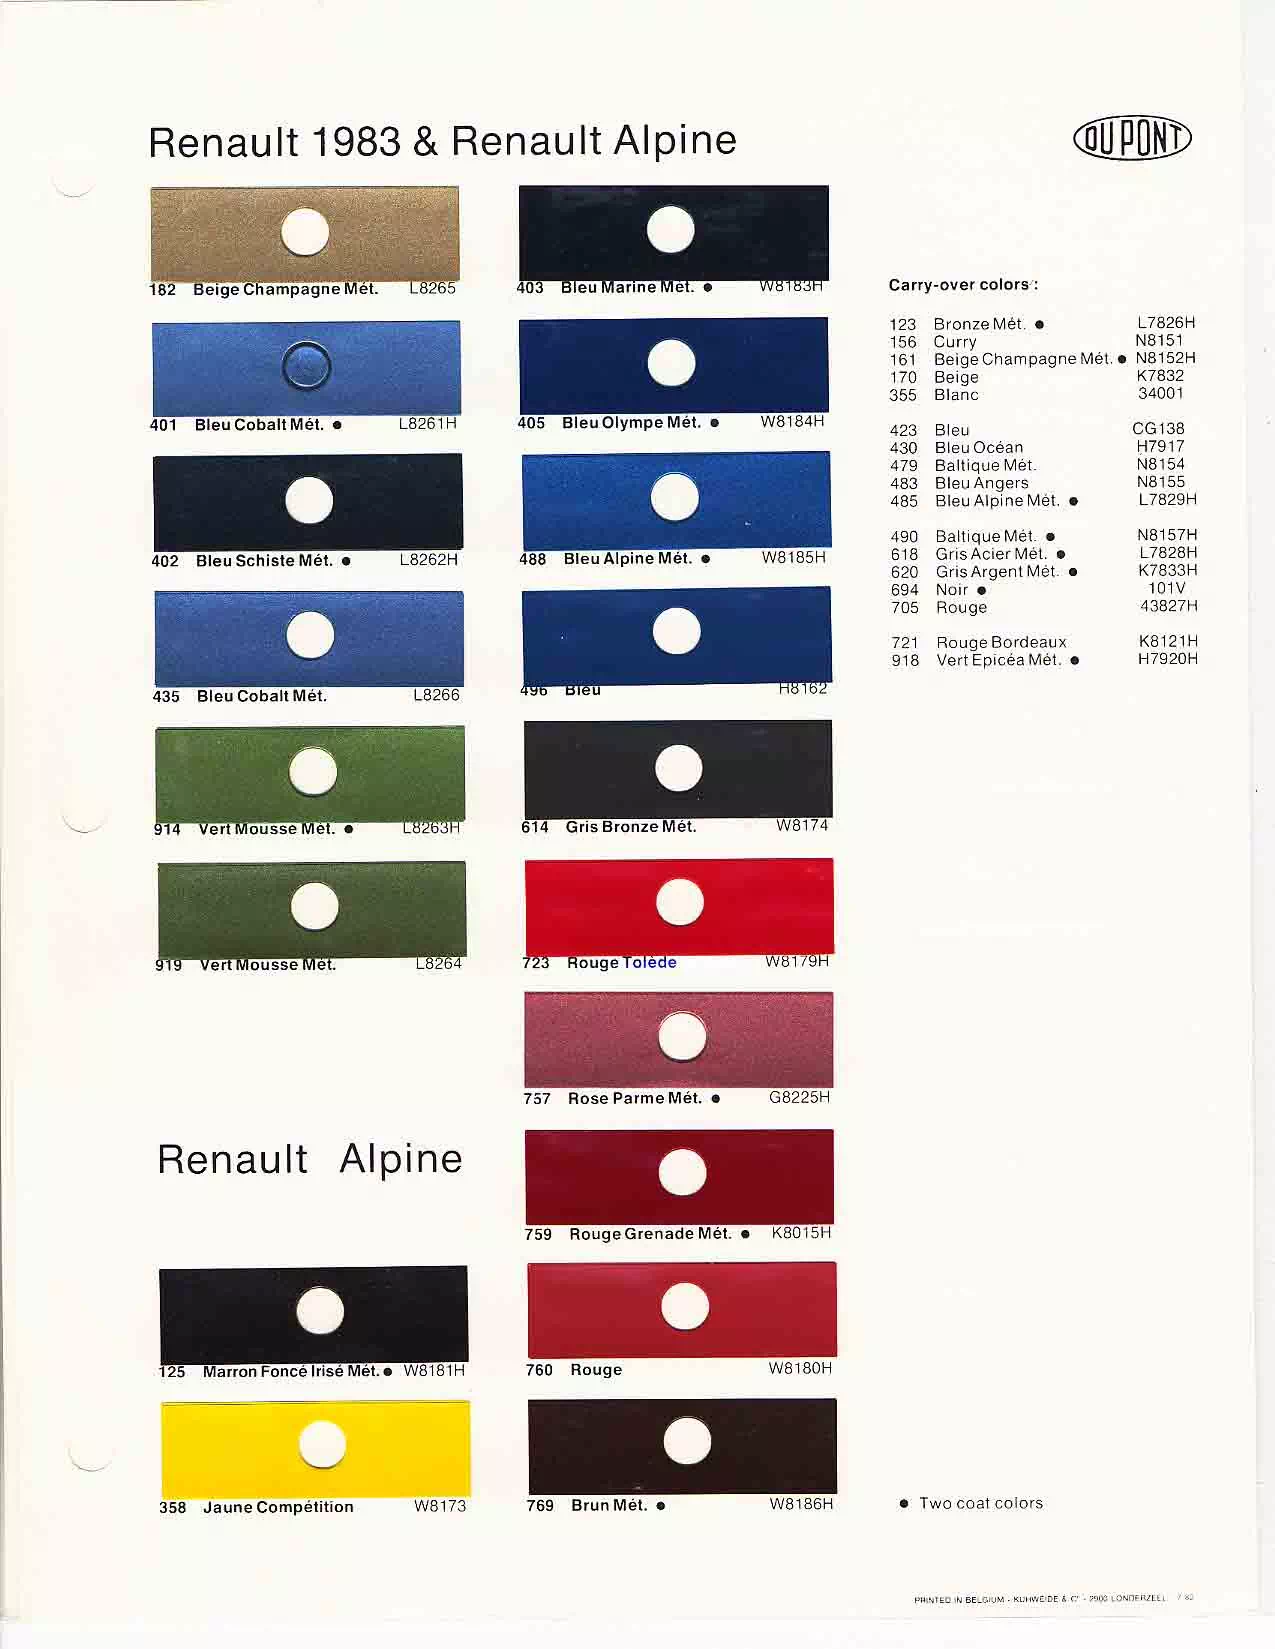 A paint chart for exterior colors, their codes, their names, and swatches for Renault automobiles.